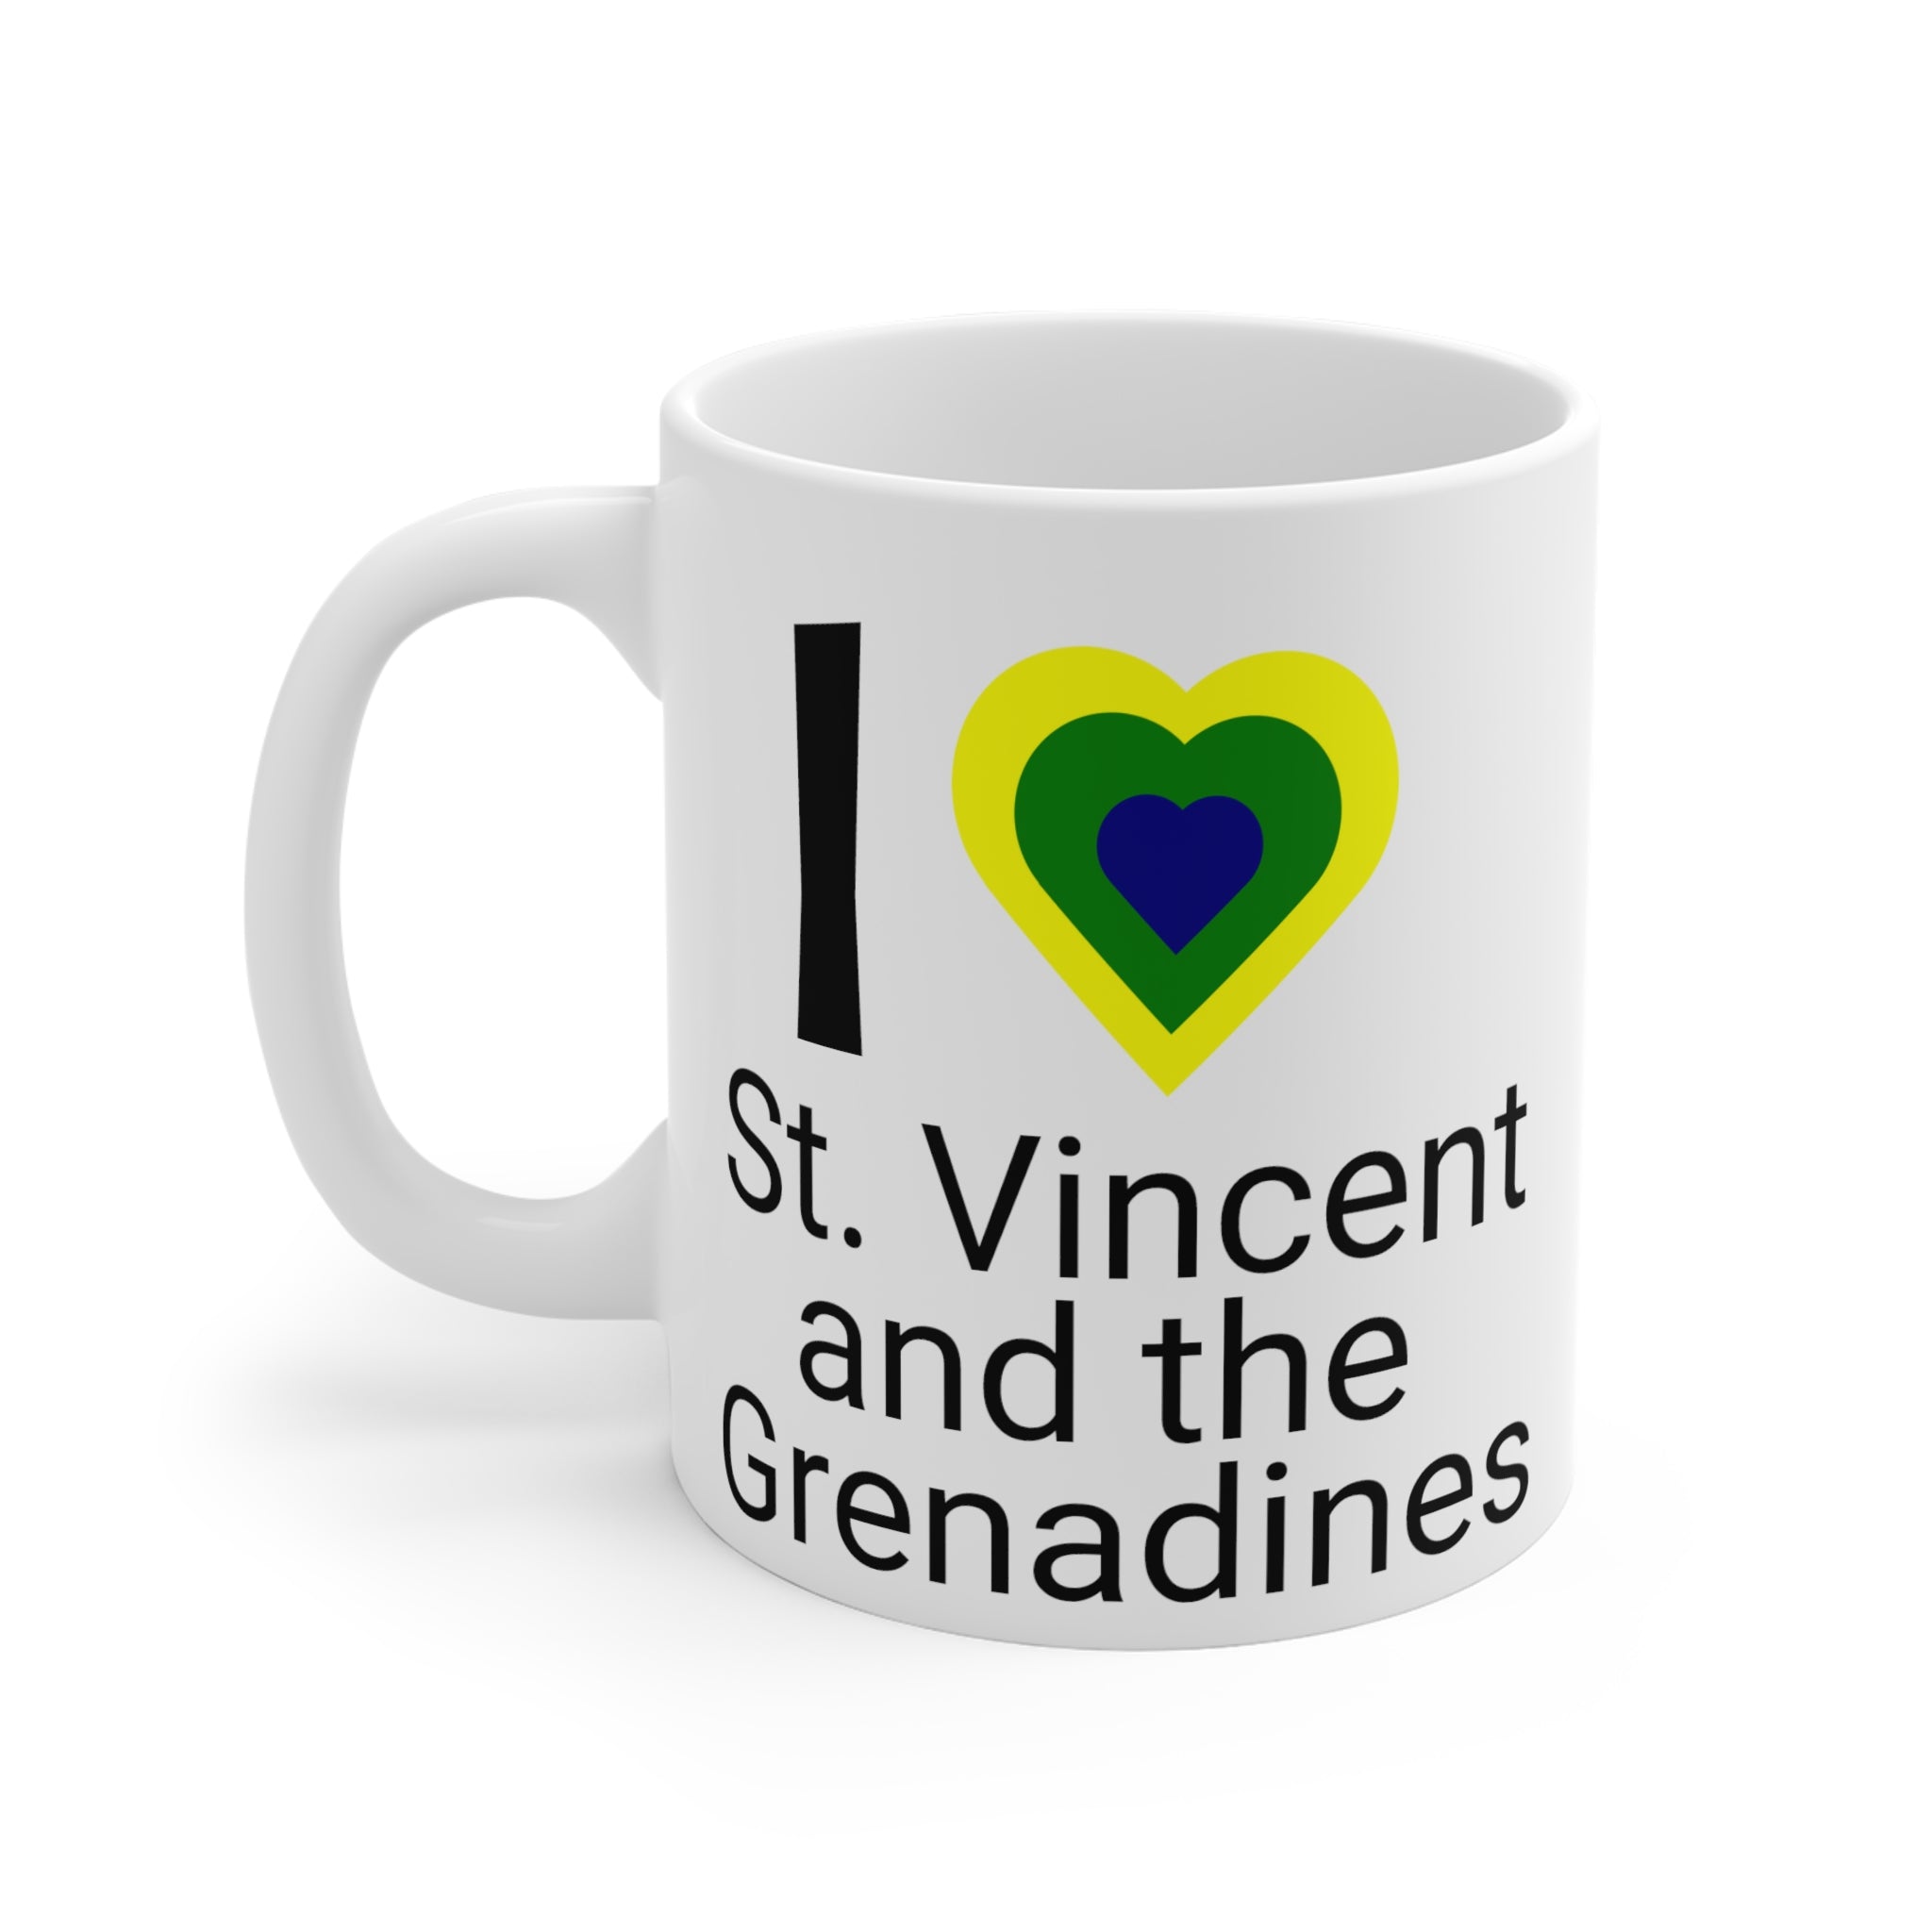 11oz coffee mug saying 'I love St. Vincent and the Grenadines' with a yellow heart